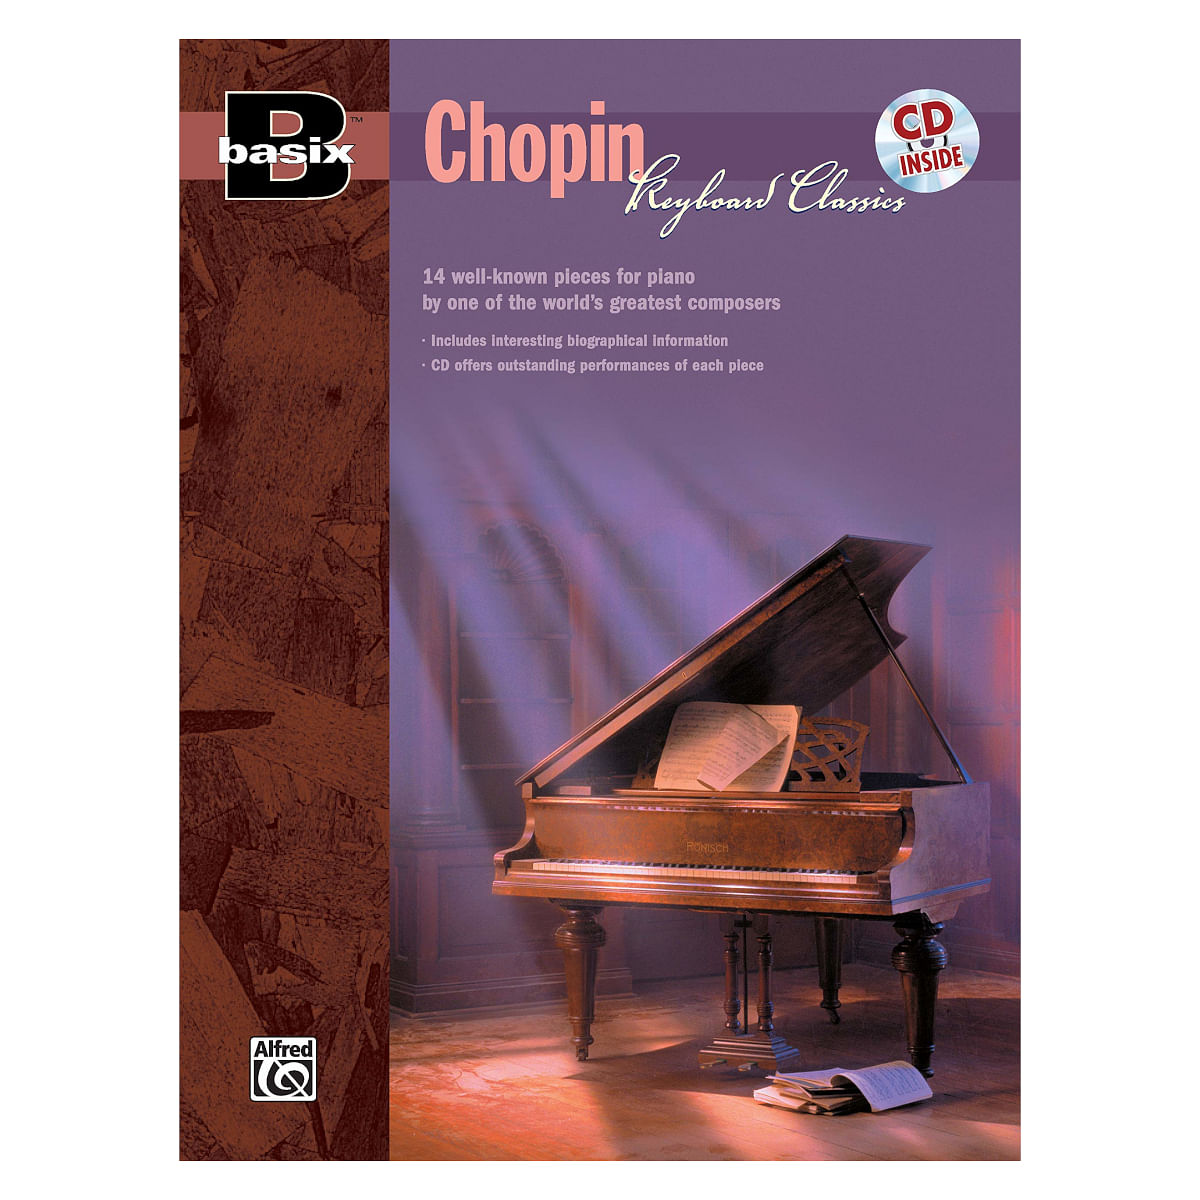 Buy Chopin F, Basix Keyboard Classics -CD Best Piano Collections   Repertoire Books in India